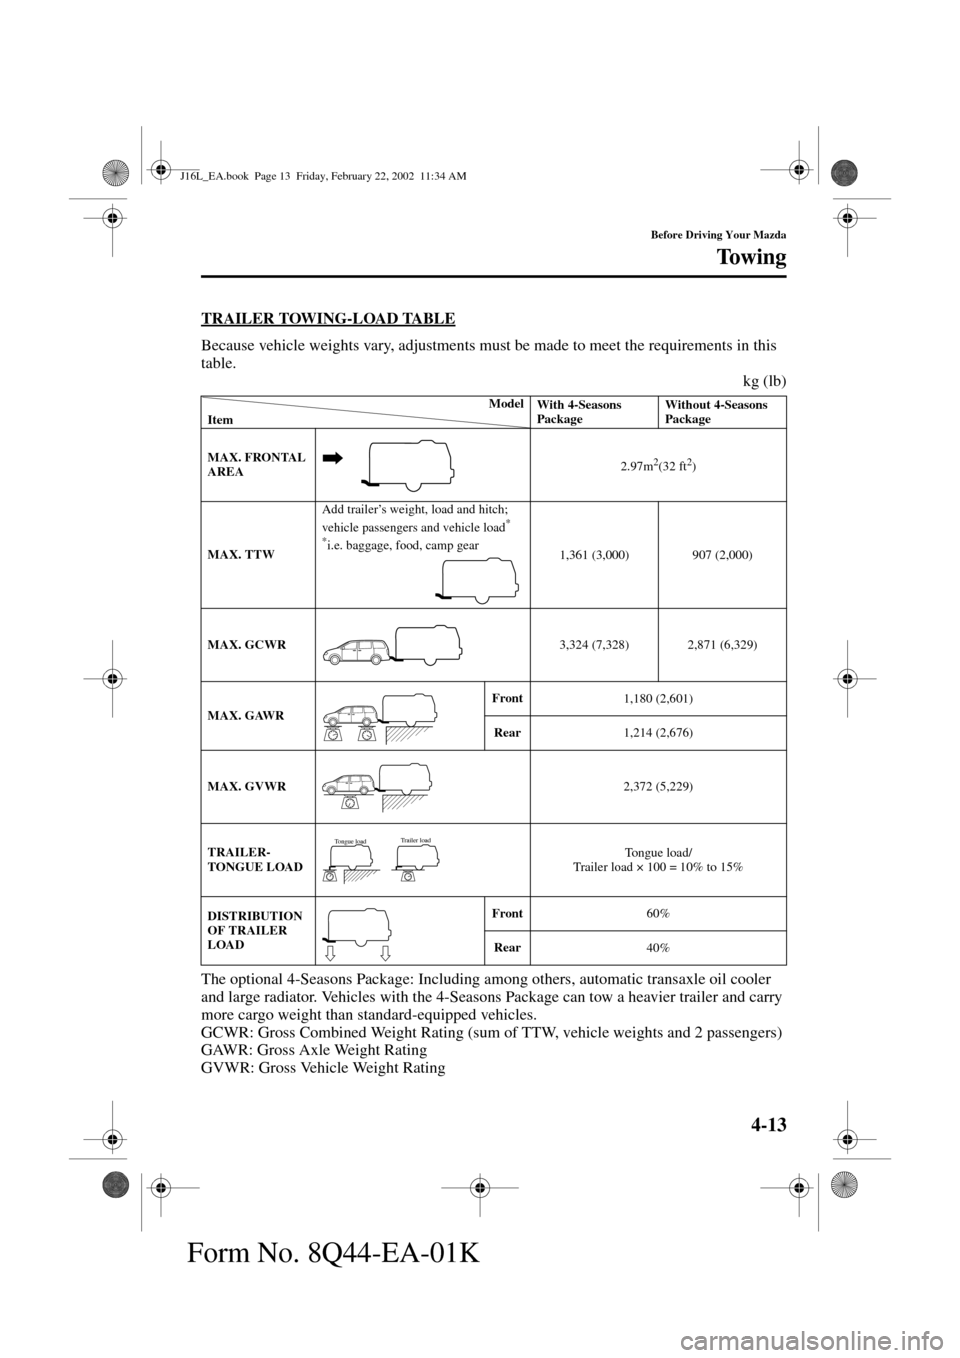 MAZDA MODEL MPV 2002  Owners Manual (in English) 4-13
Before Driving Your Mazda
To w i n g
Form No. 8Q44-EA-01K
TRAILER TOWING-LOAD TABLE
Because vehicle weights vary, adjustments must be made to meet the requirements in this 
table.
kg (lb)
The opt